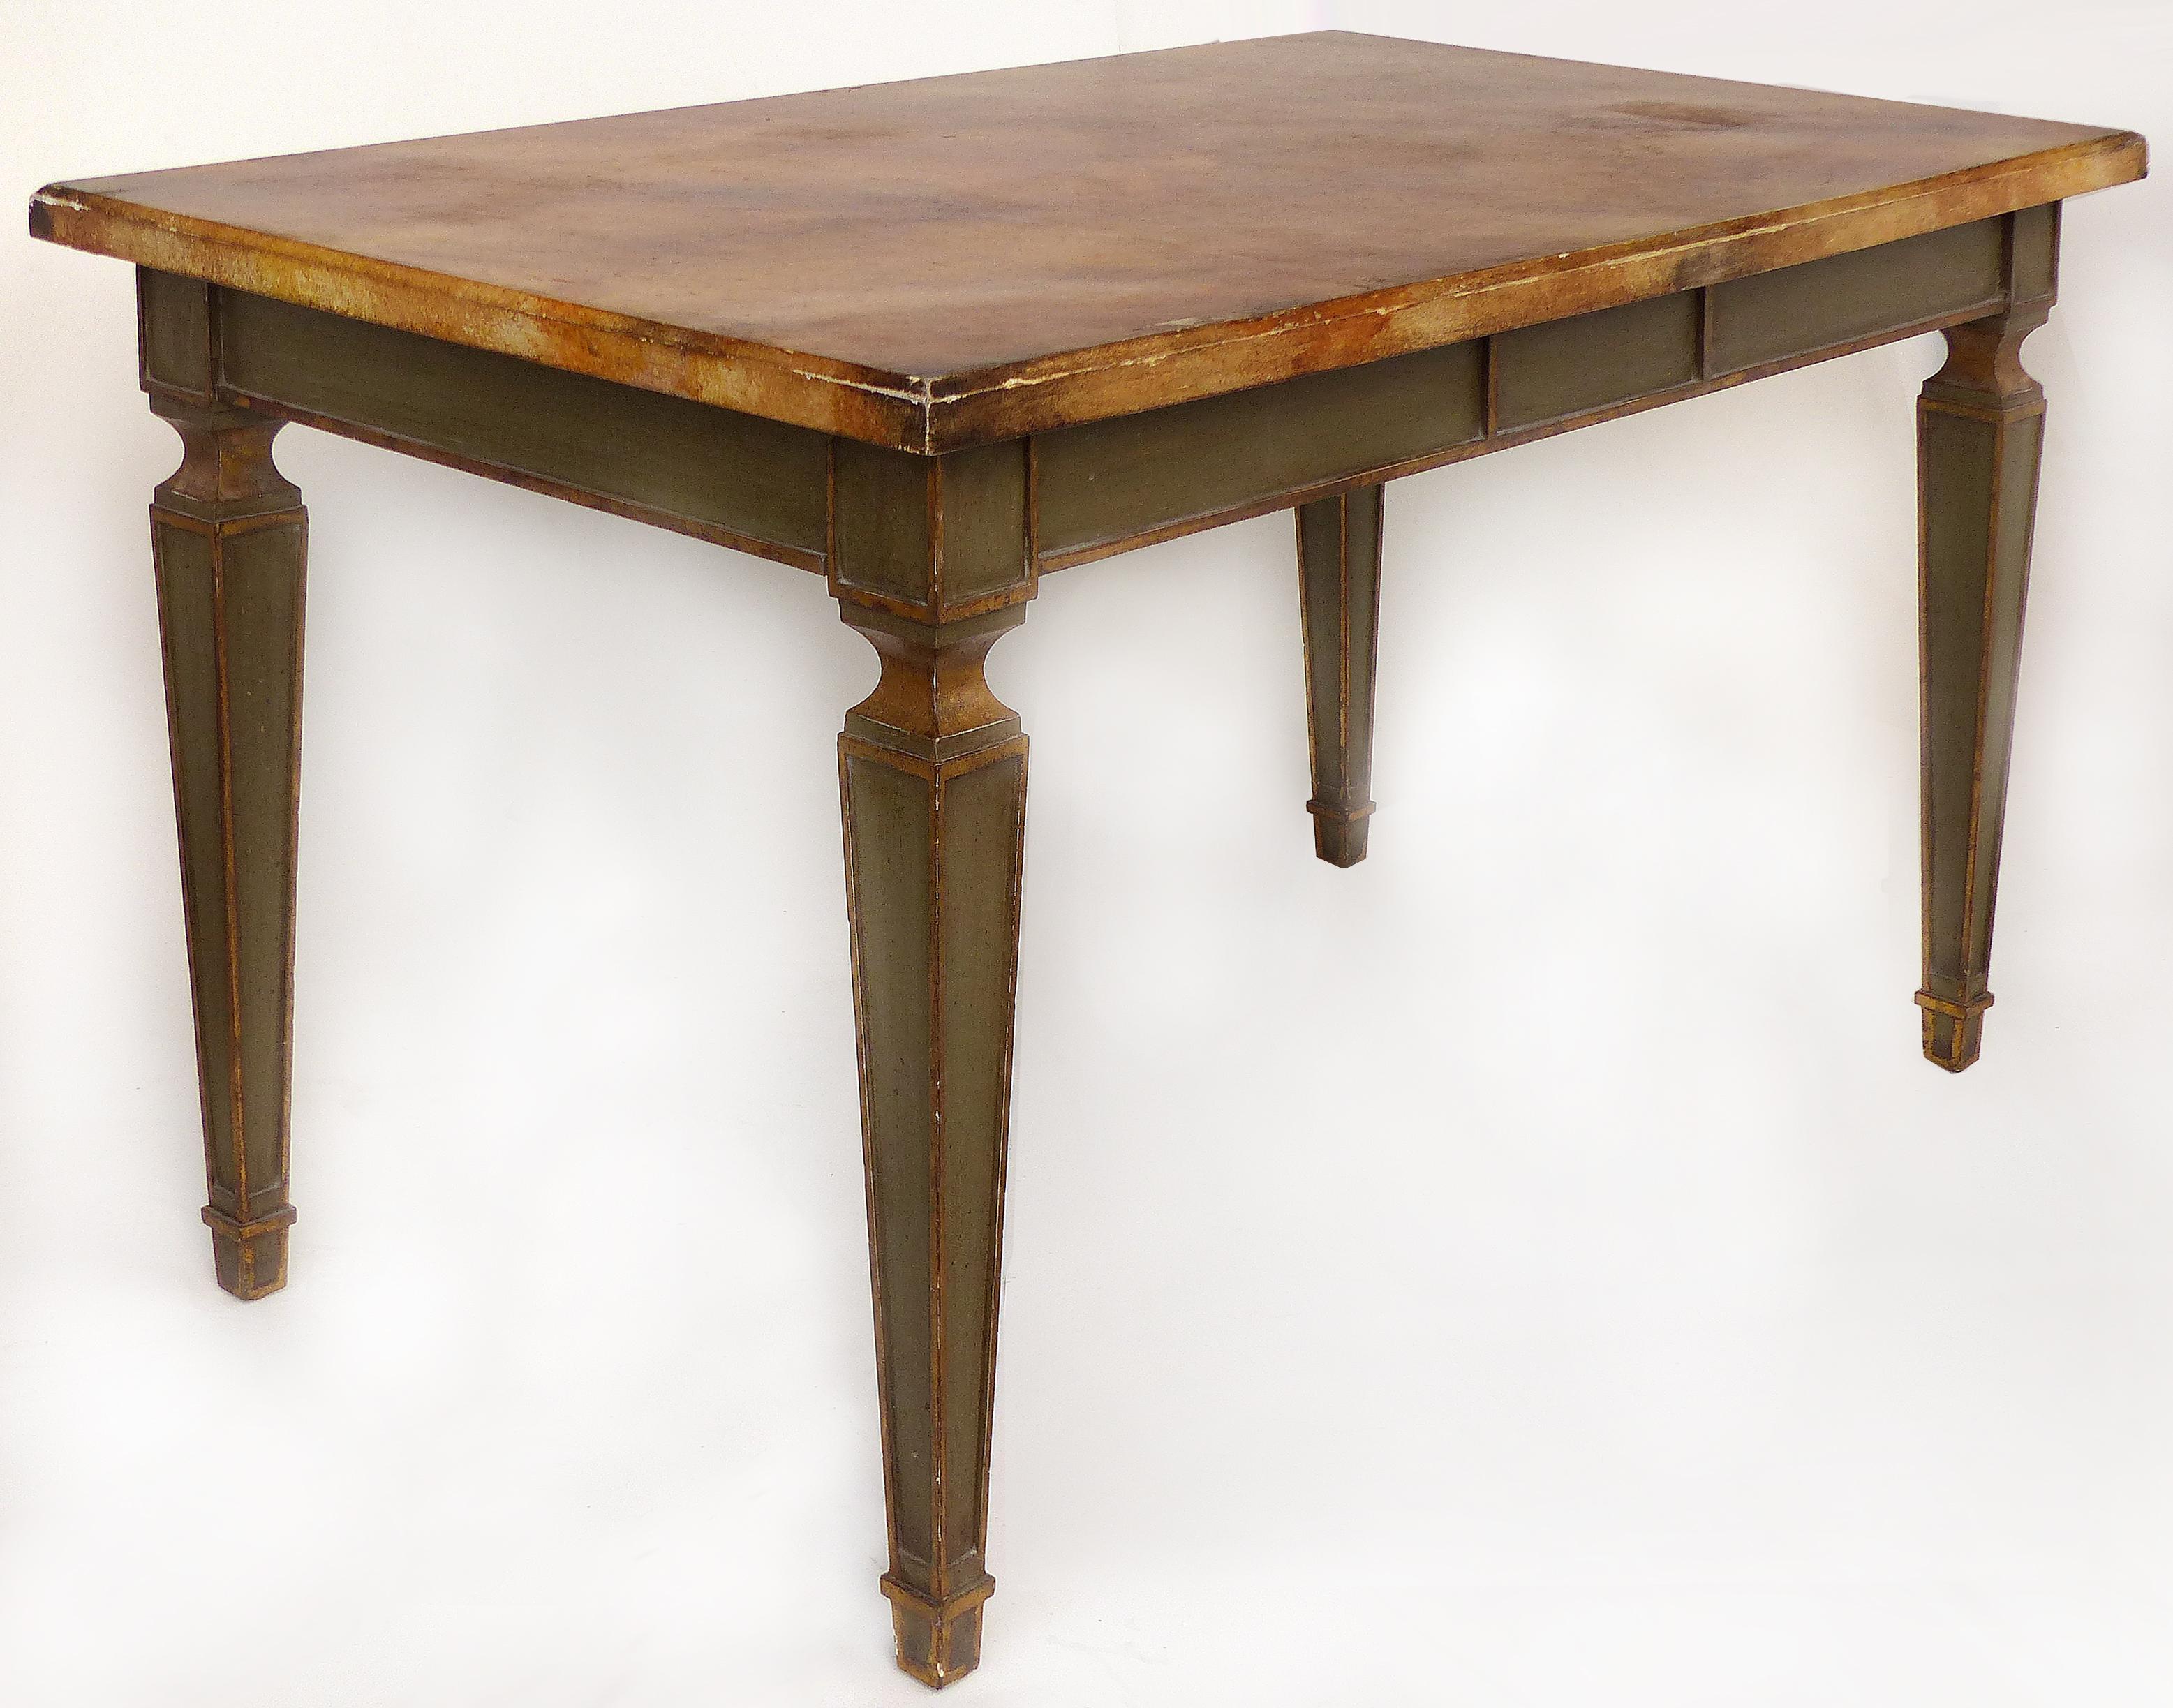 Faux Painted Writing Library Table with Green and Gilt Tapering Legs

Offered for sale is a faux-finished writing or library table with painted tapered legs and gilt accents. The top is artist faux-marble painted and the table is finished on all